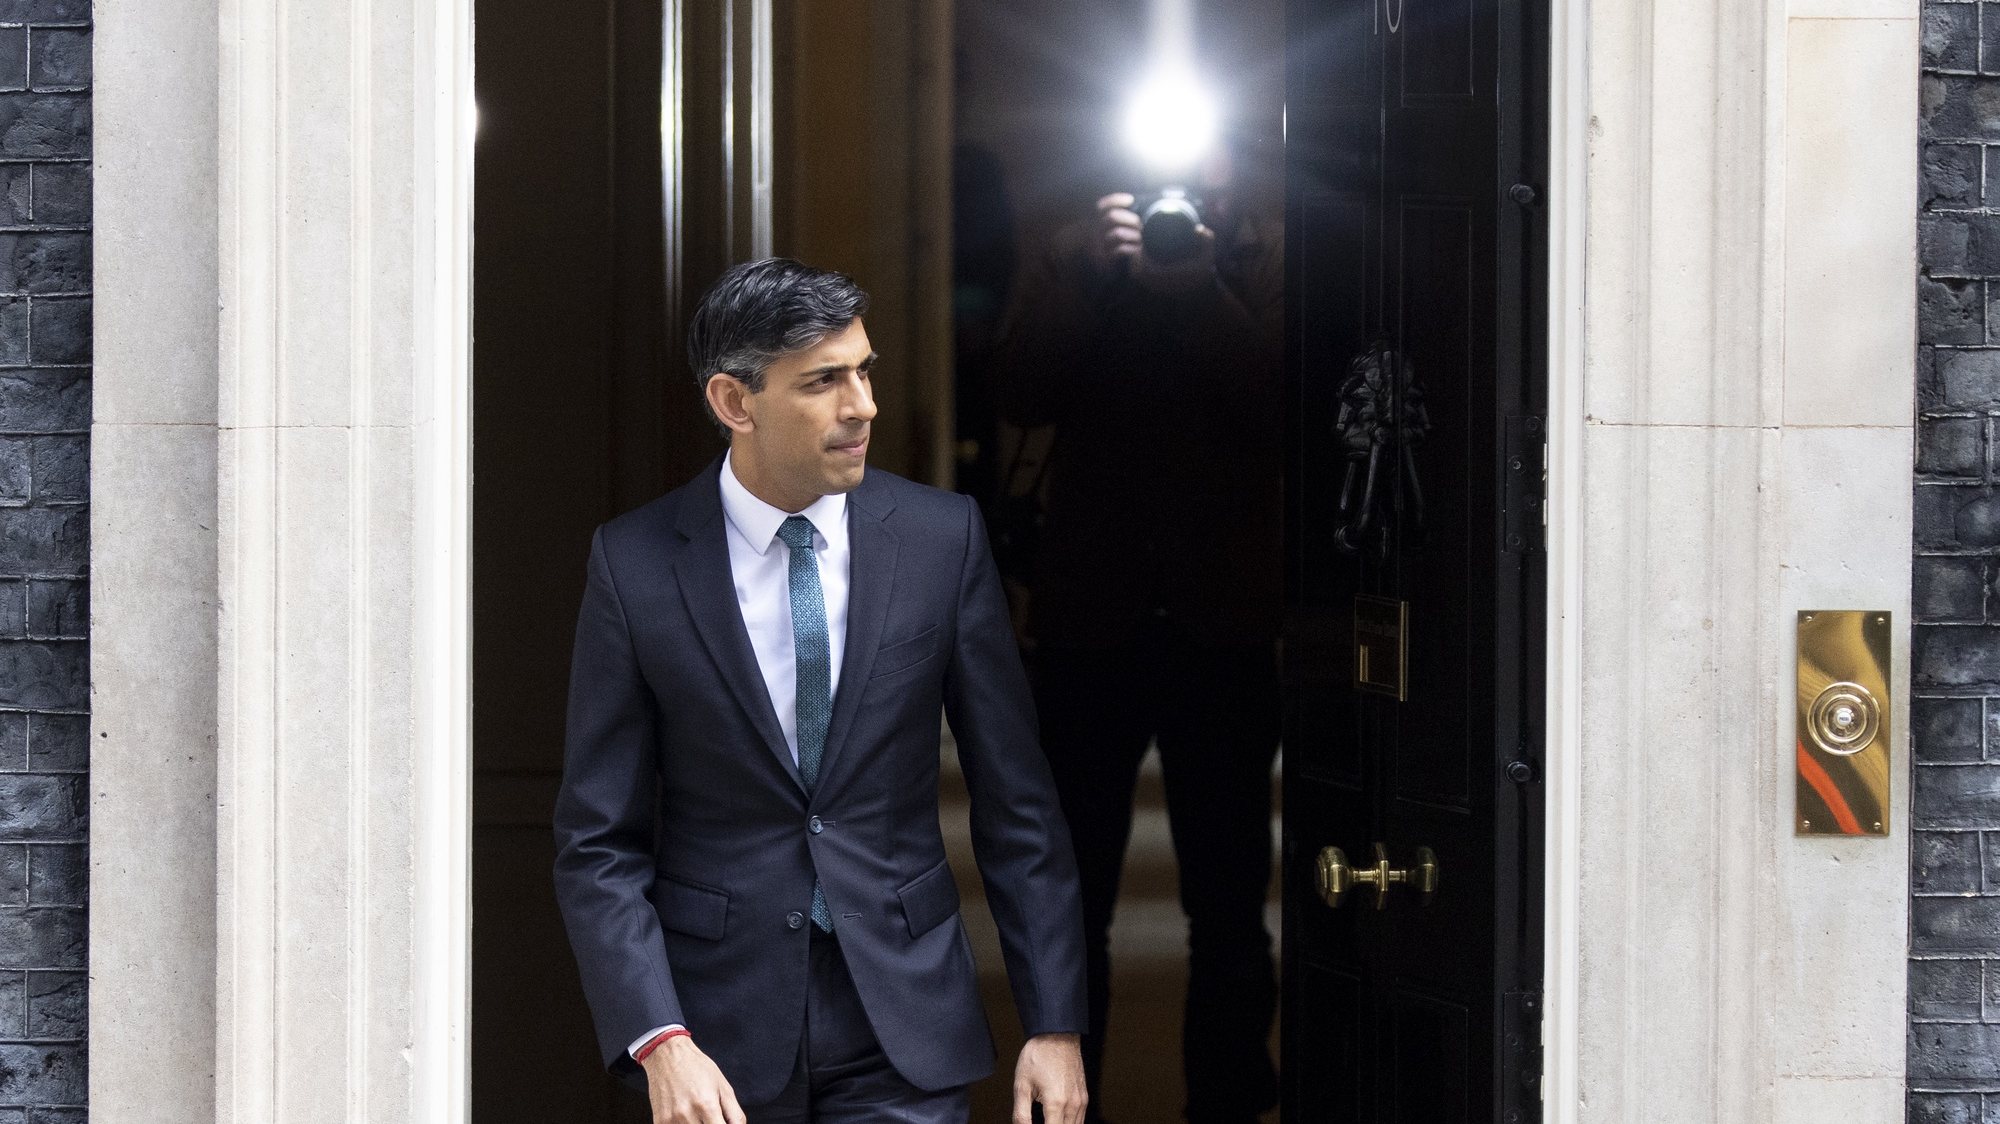 epa10540163 British Prime Minister Rishi Sunak prepares to welcome his counterpart from Israel (not pictured) at 10 Downing Street in London, Britain, 24 March 2023.  EPA/TOLGA AKMEN